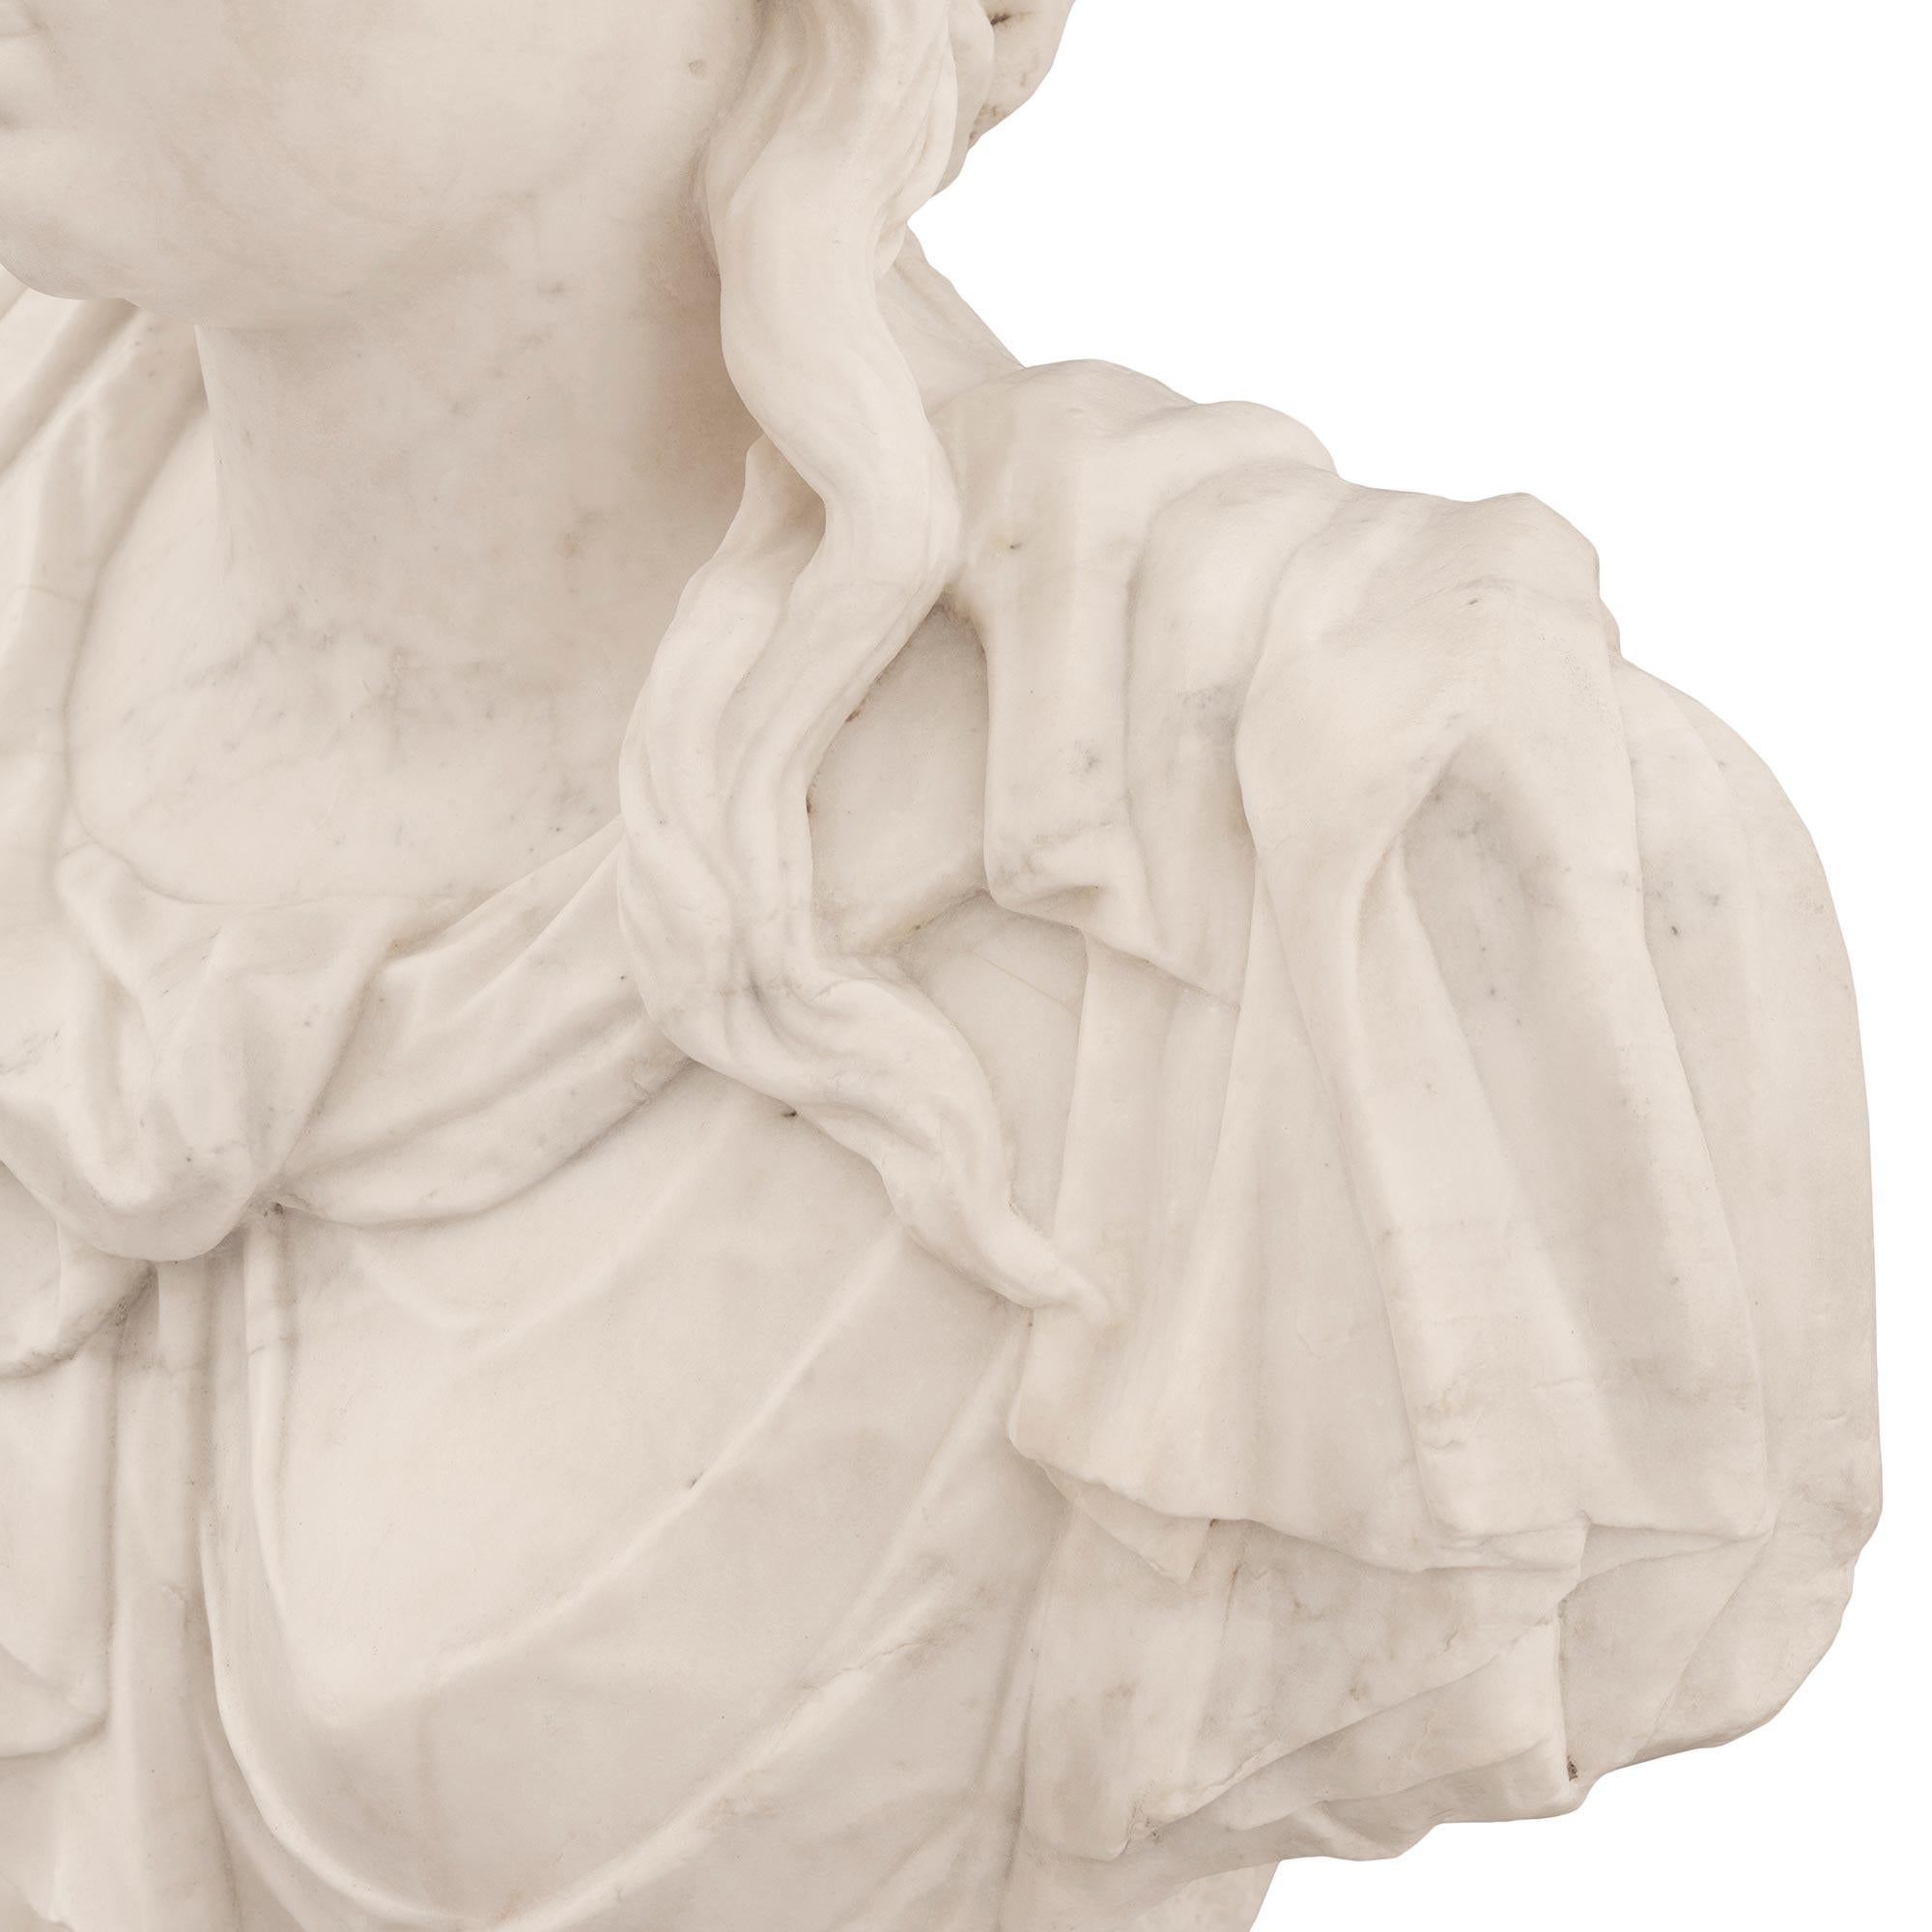 Italian, Late 17th / Early 18th Century, White Carrara Marble Bust of Athena For Sale 4